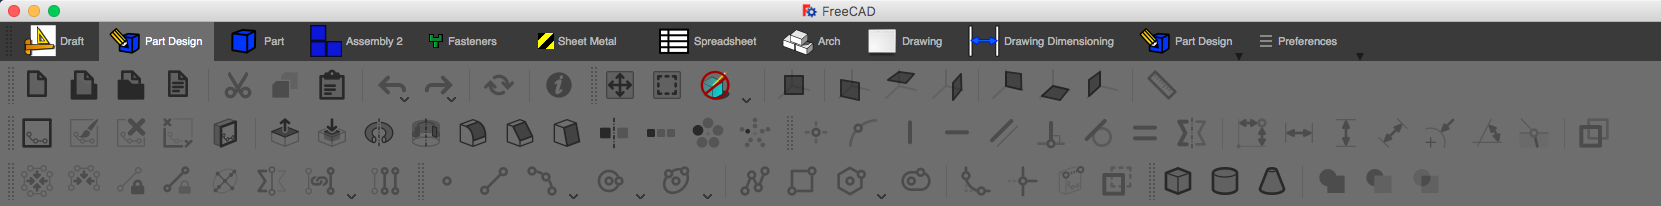 Simple iconTheme for FreeCAD